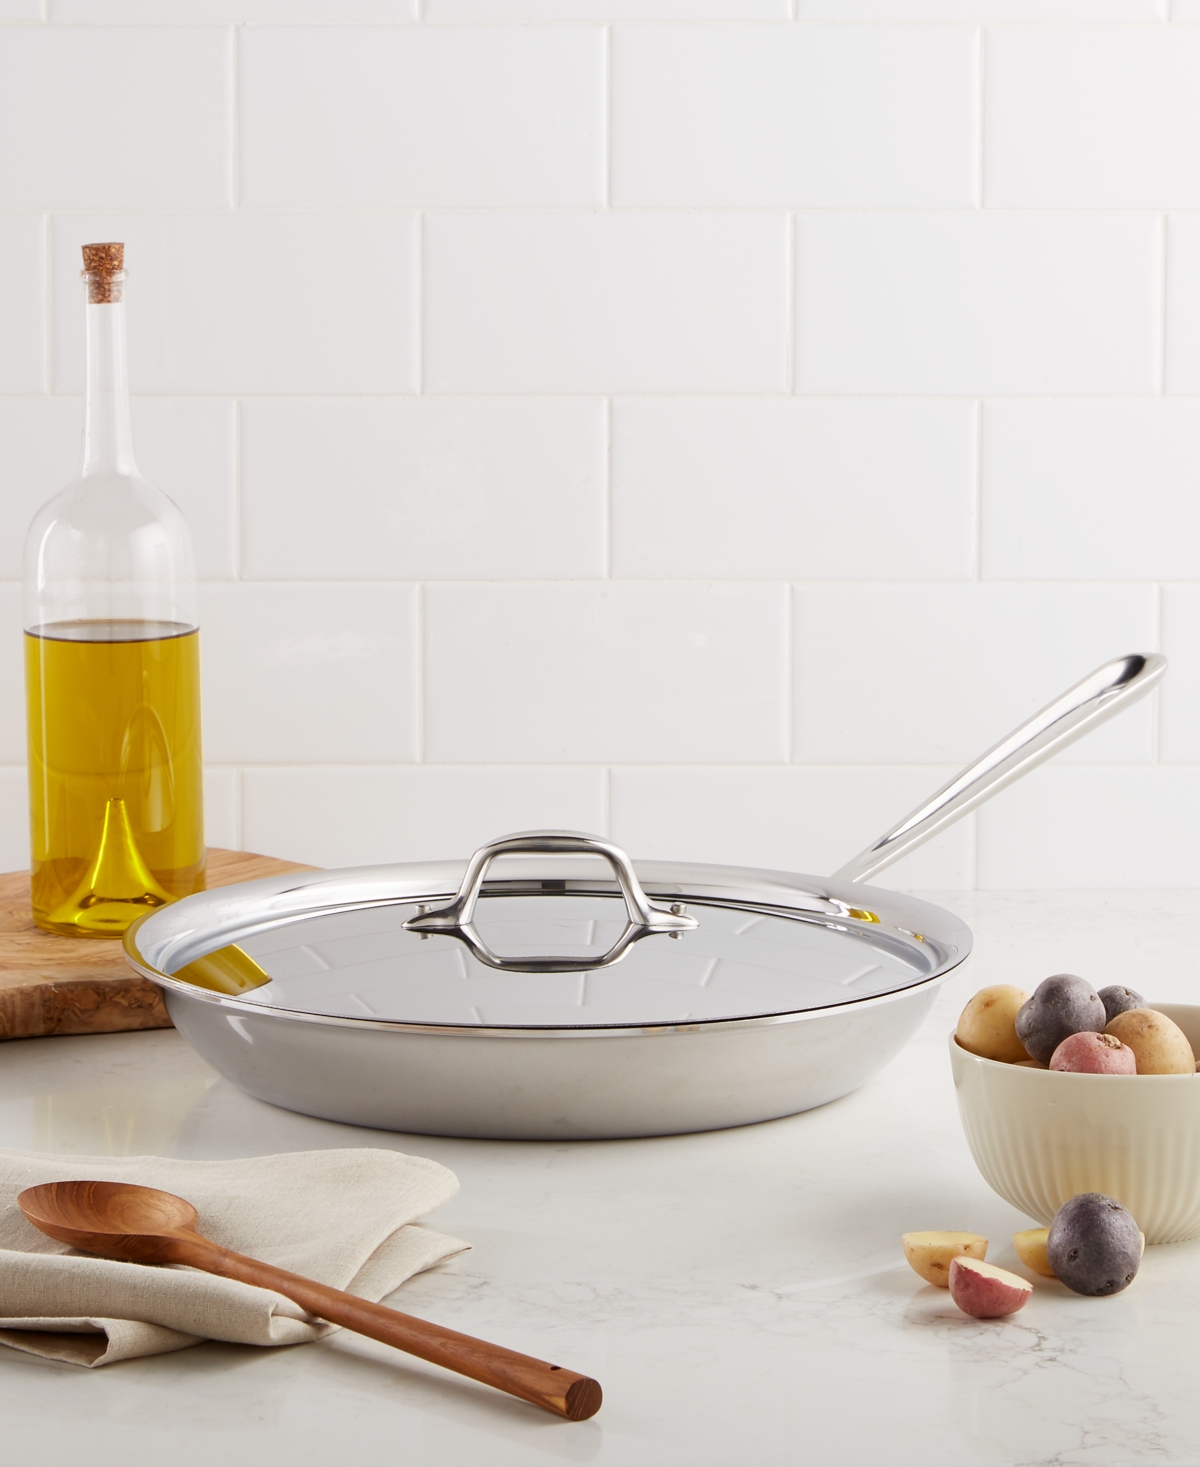 All-Clad Stainless Steel 12 Covered Fry Pan